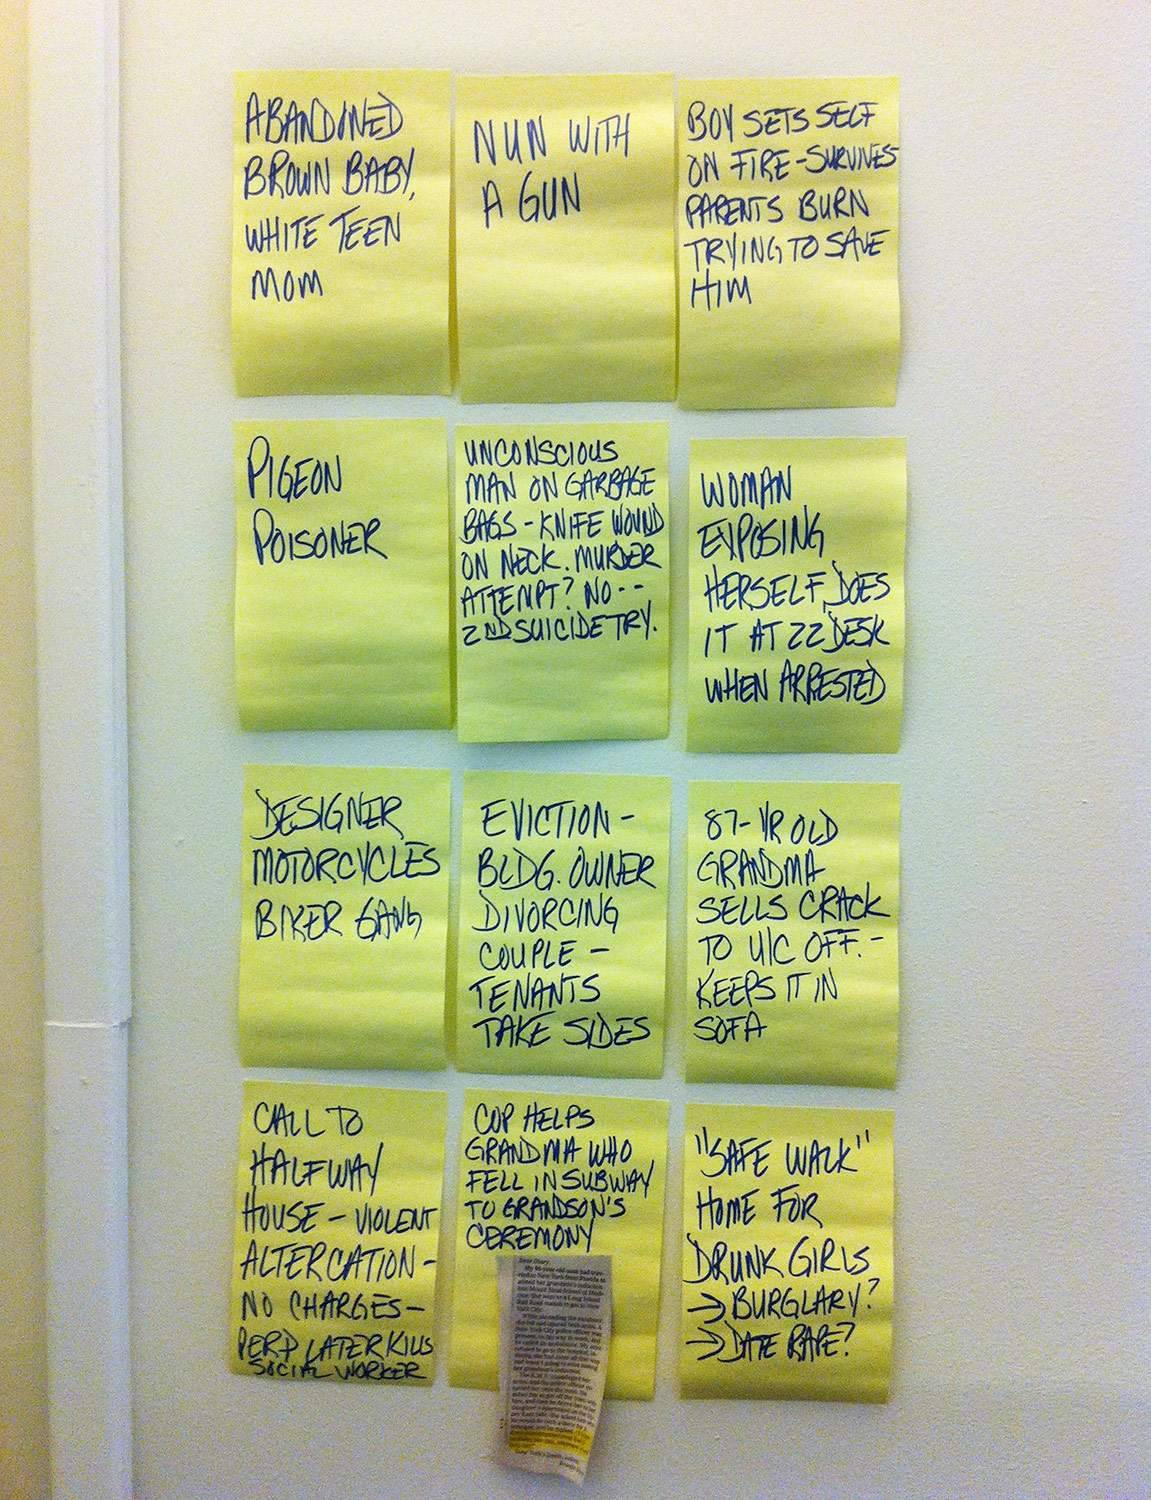 Post-It notes of story ideas on the office wall